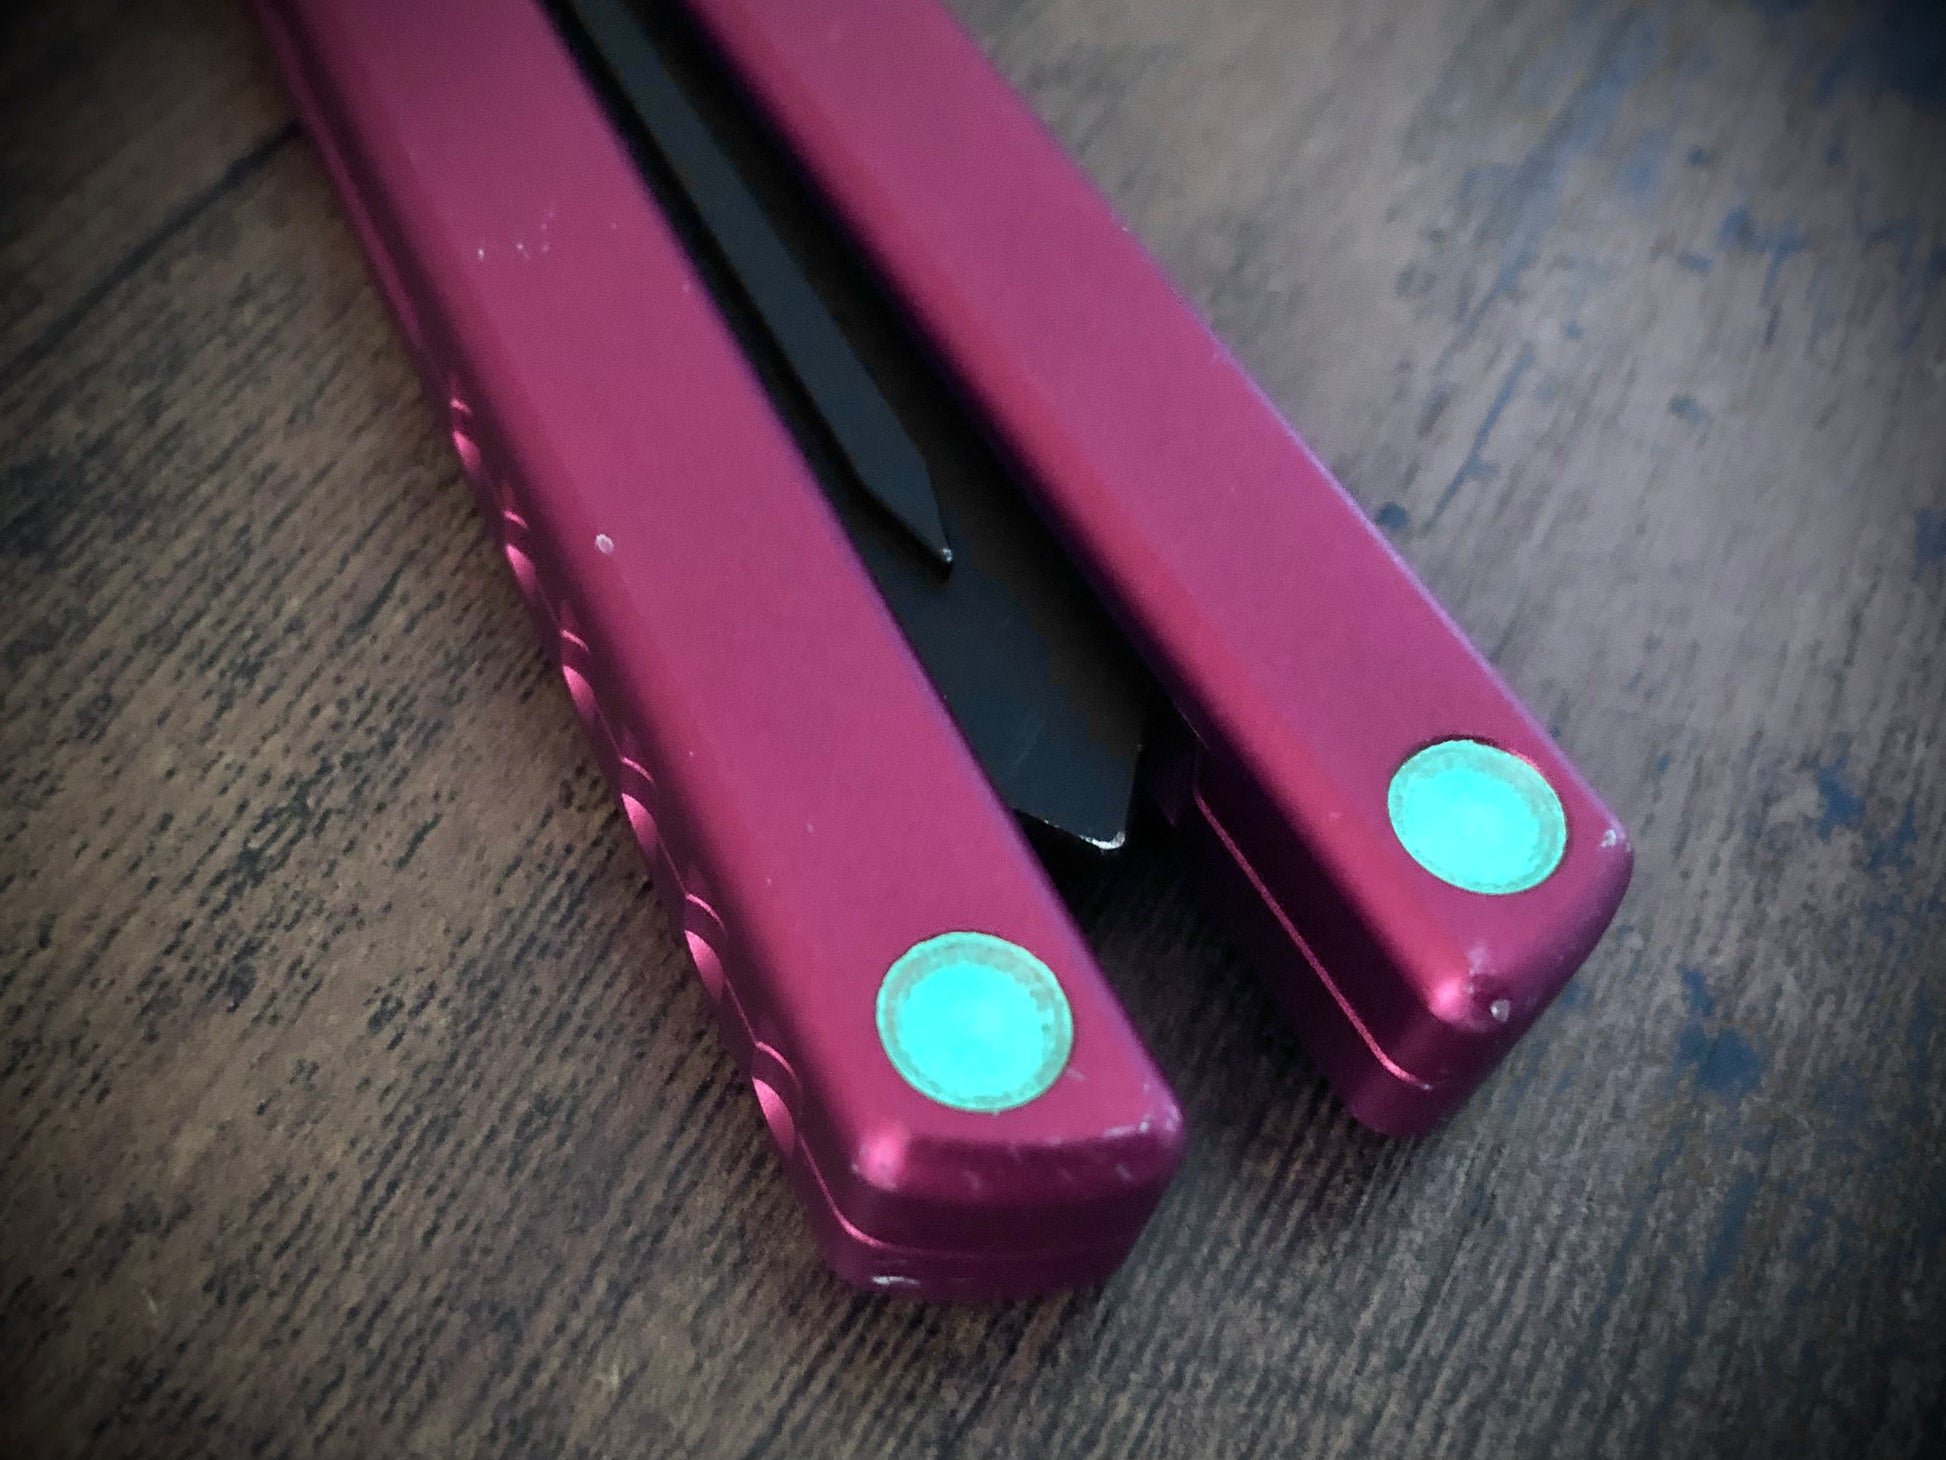 Reduce the handle bias of balisongs that accept 3/16" sexbolts at the base of the handles. This mod replaces the metal sexbolts at the base of the handles with featherweight, shatter-proof polyurethane sexbolts to reduce end-weight and modify the weight distribution of your balisong. 